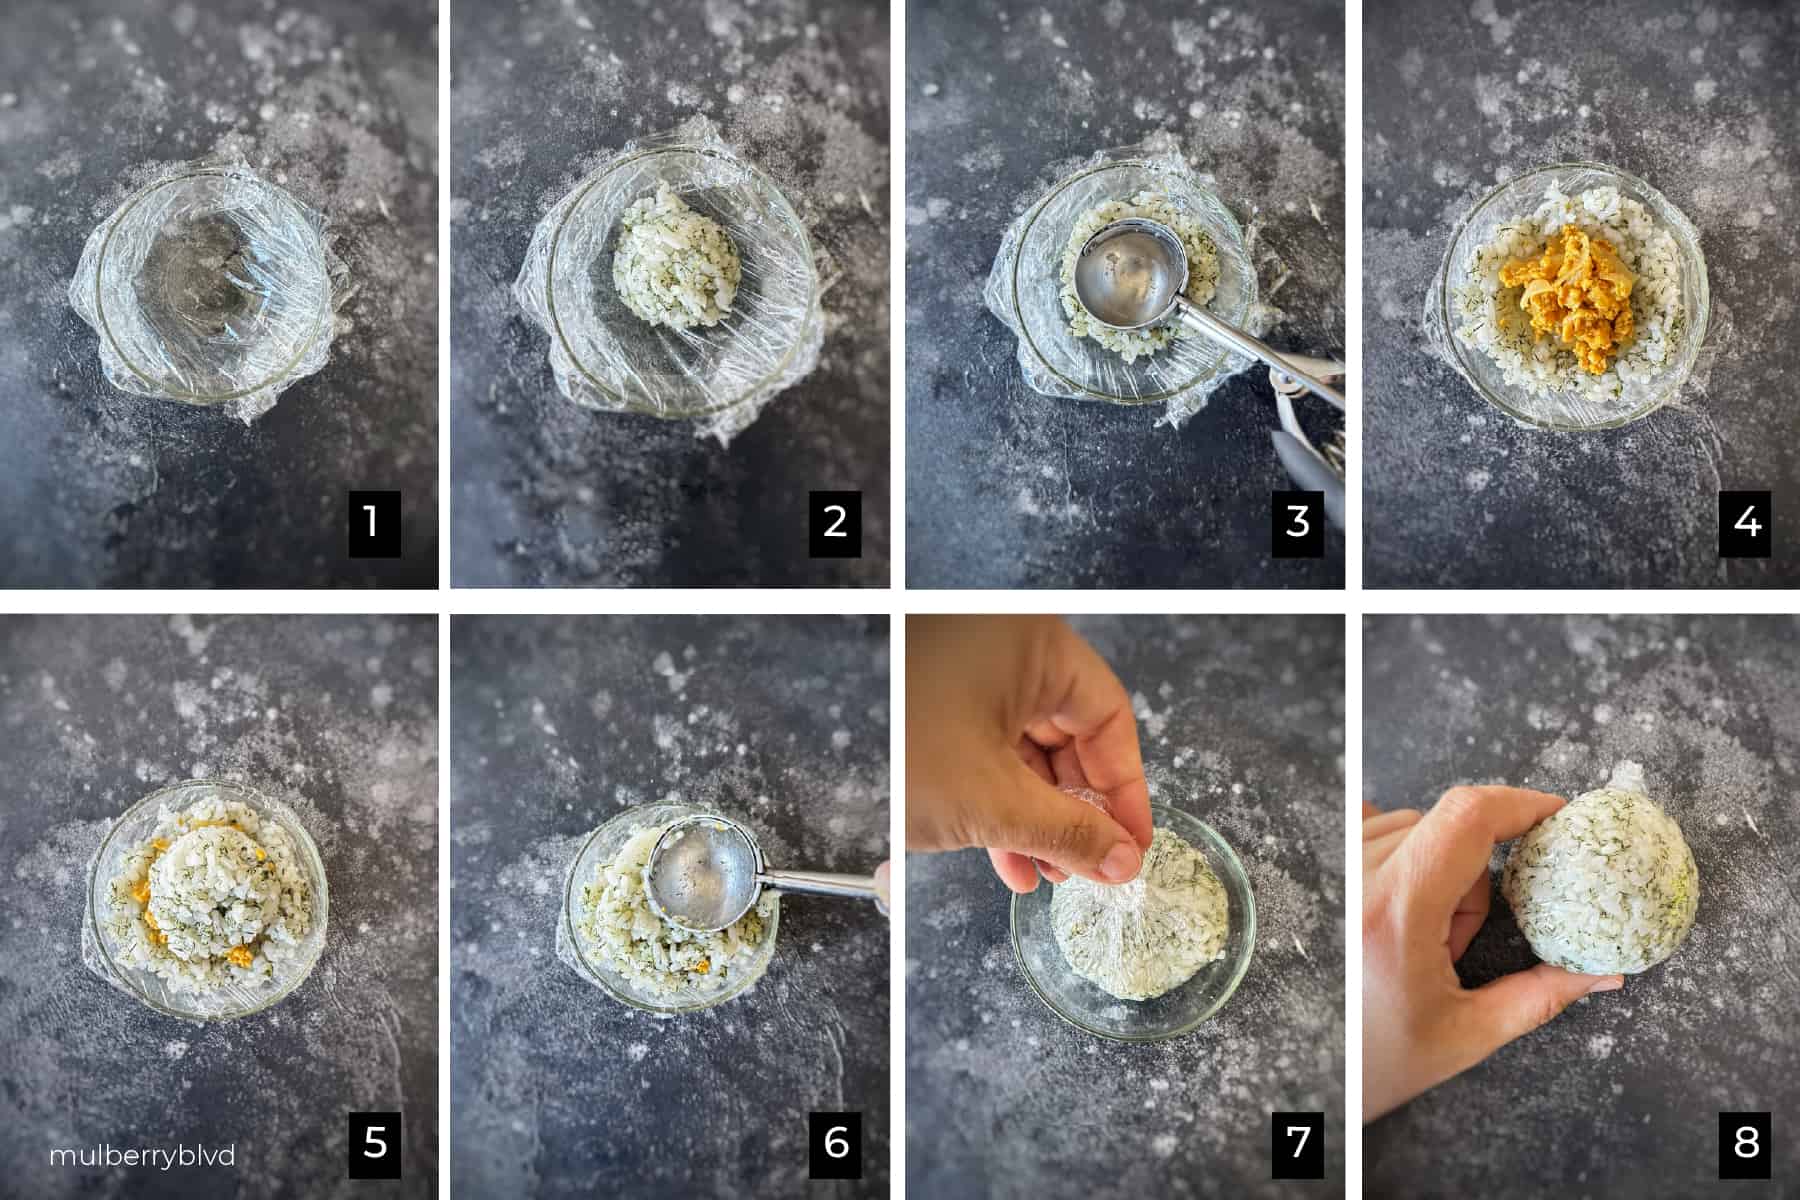 Step by step process for forming the Crispy Tahdig rice balls